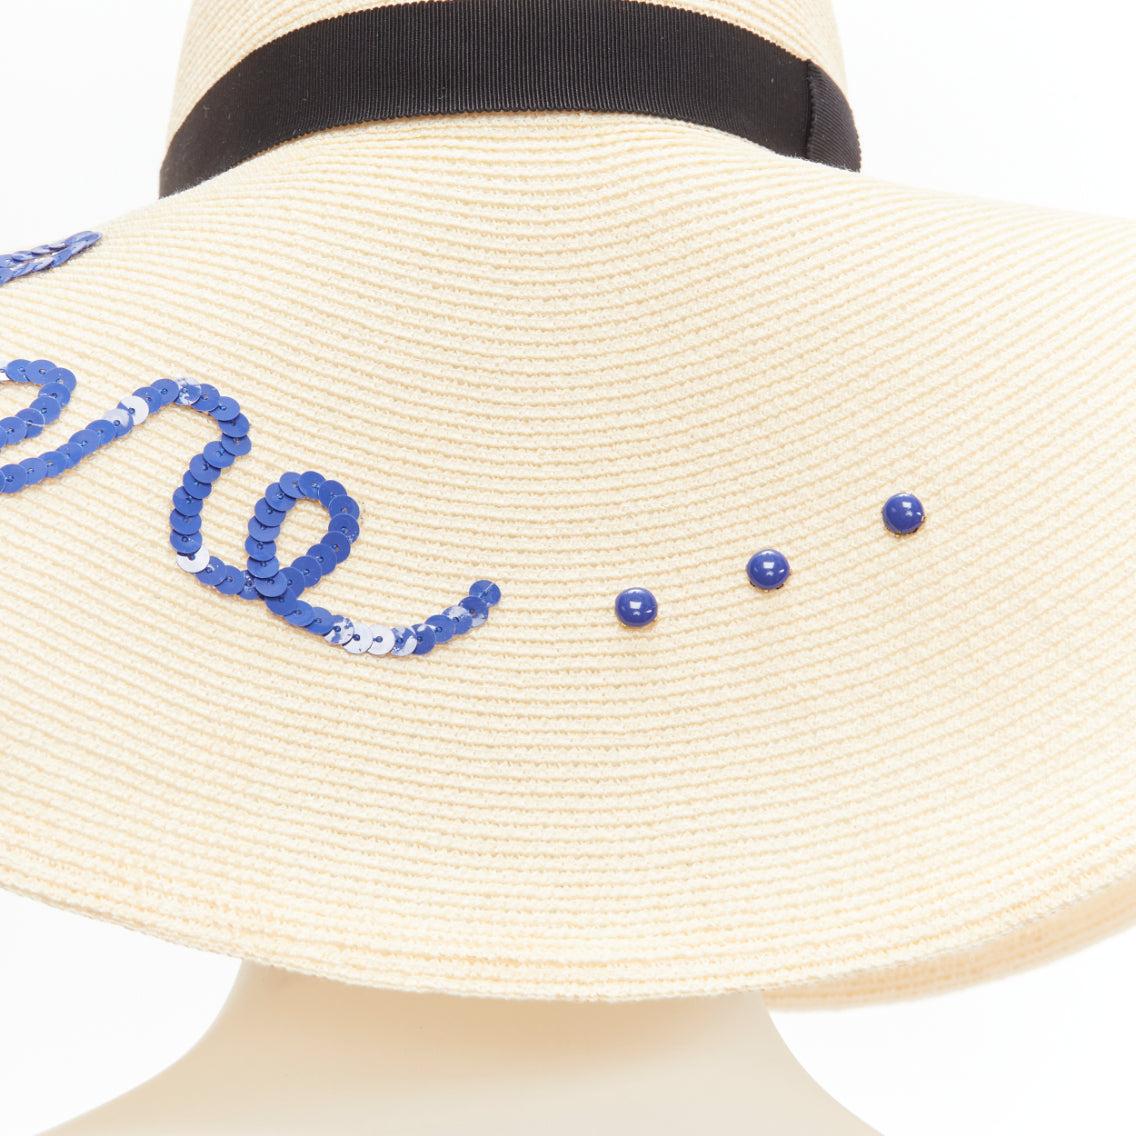 EUGENIA KIM blue sequins Wish You Were Here beige toyo paper cotton sun hat For Sale 3